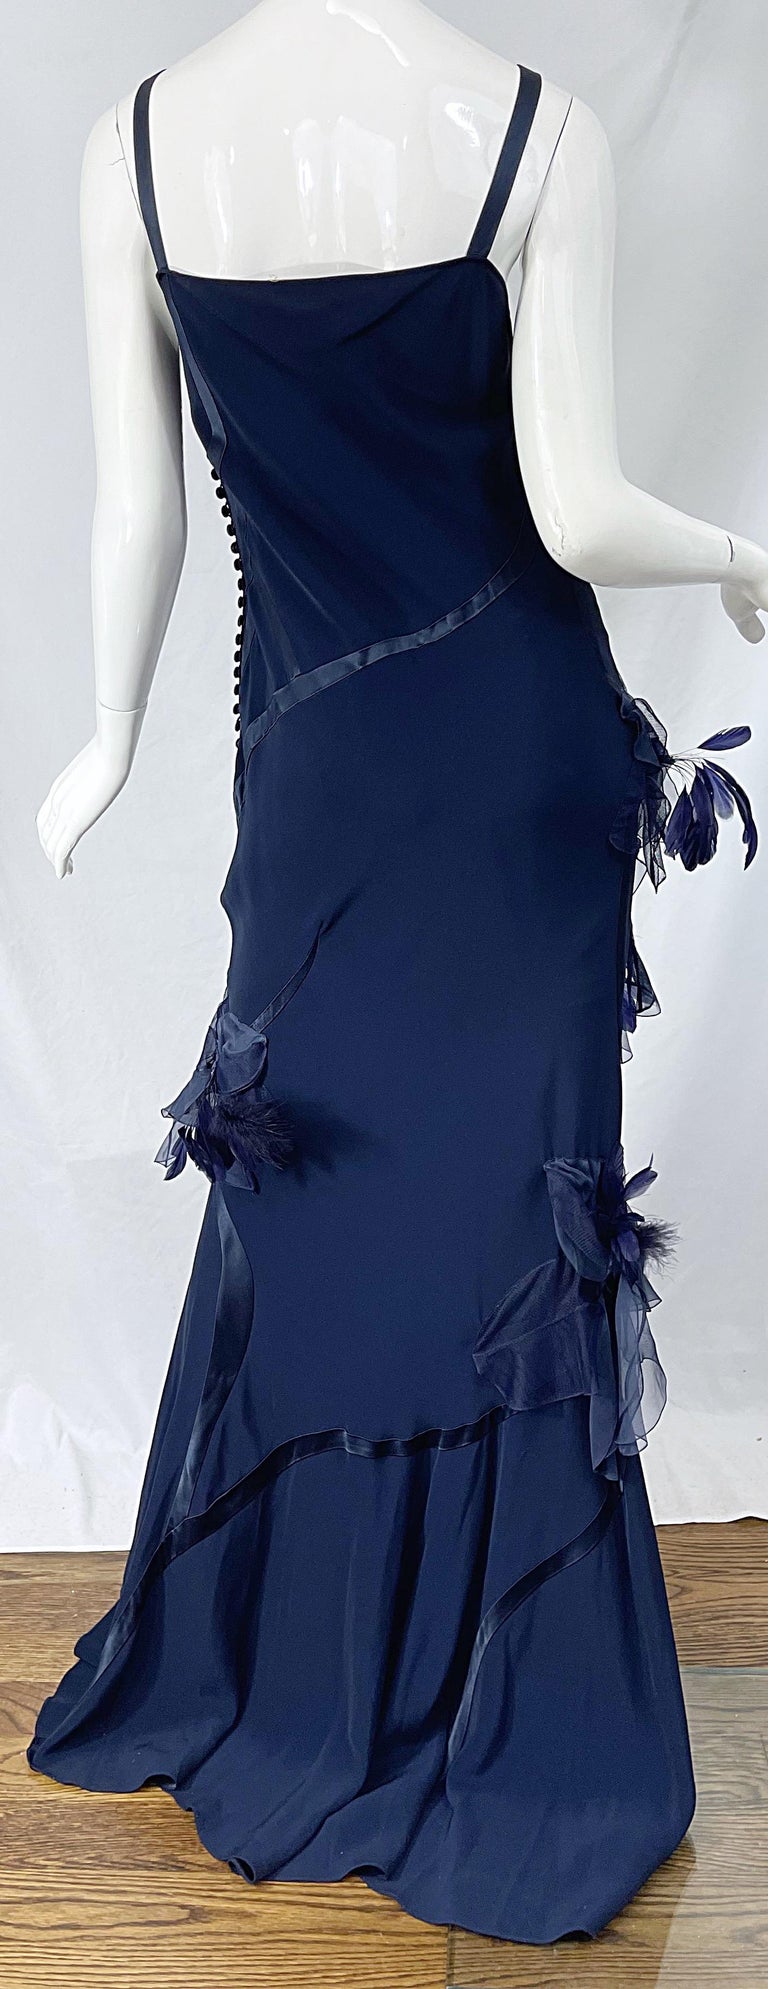 NWT John Galliano Size 10 Early 2000s Navy Blue Feather Silk / Satin Gown Dress For Sale 2